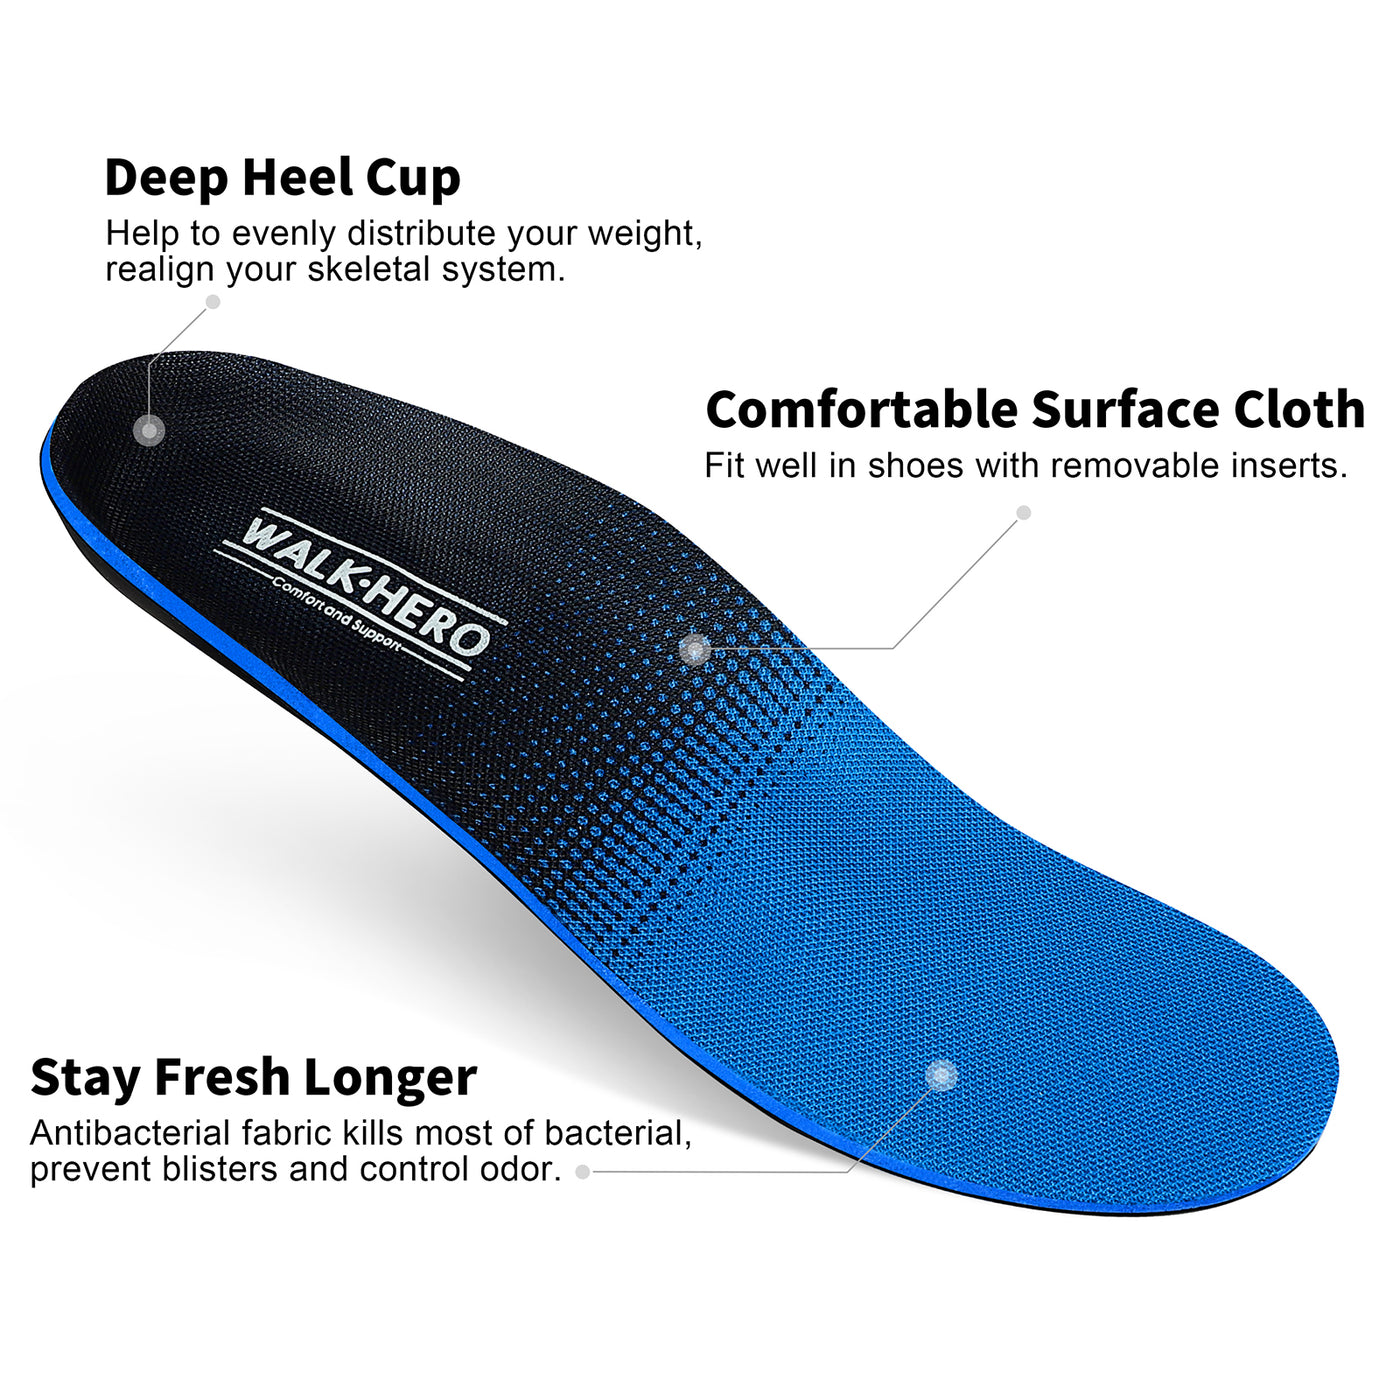 WALKHERO Men's Arch Support Orthotic Insoles New Blue & Blue 2-Pairs